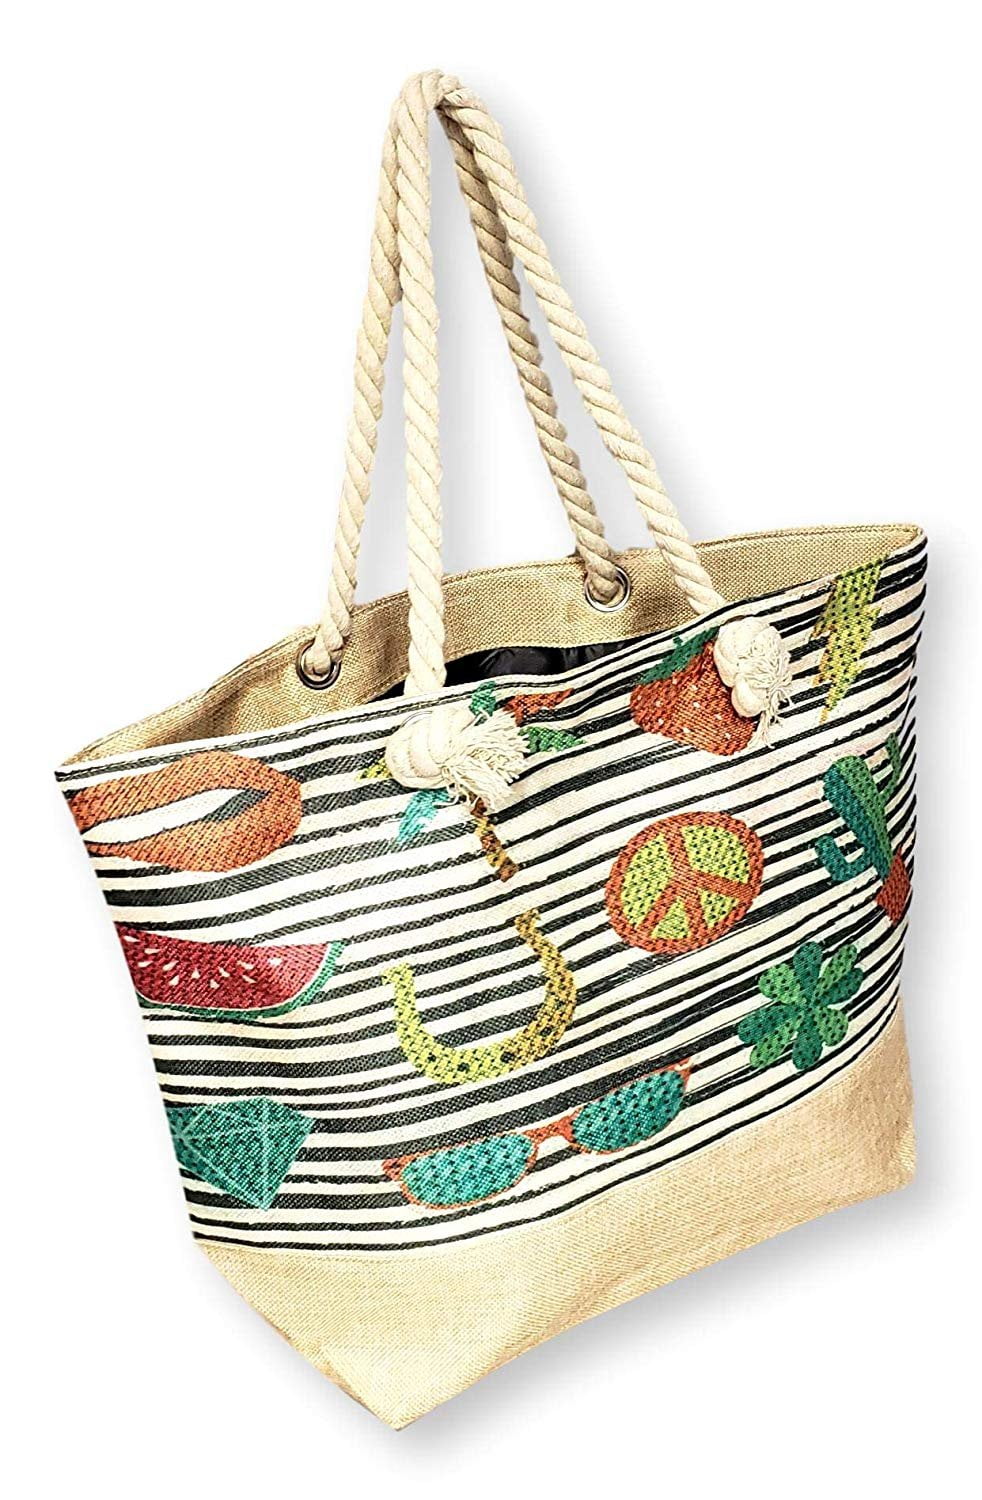 Funny Novelty Printed Womens Leather Handbags Shoulder Tote